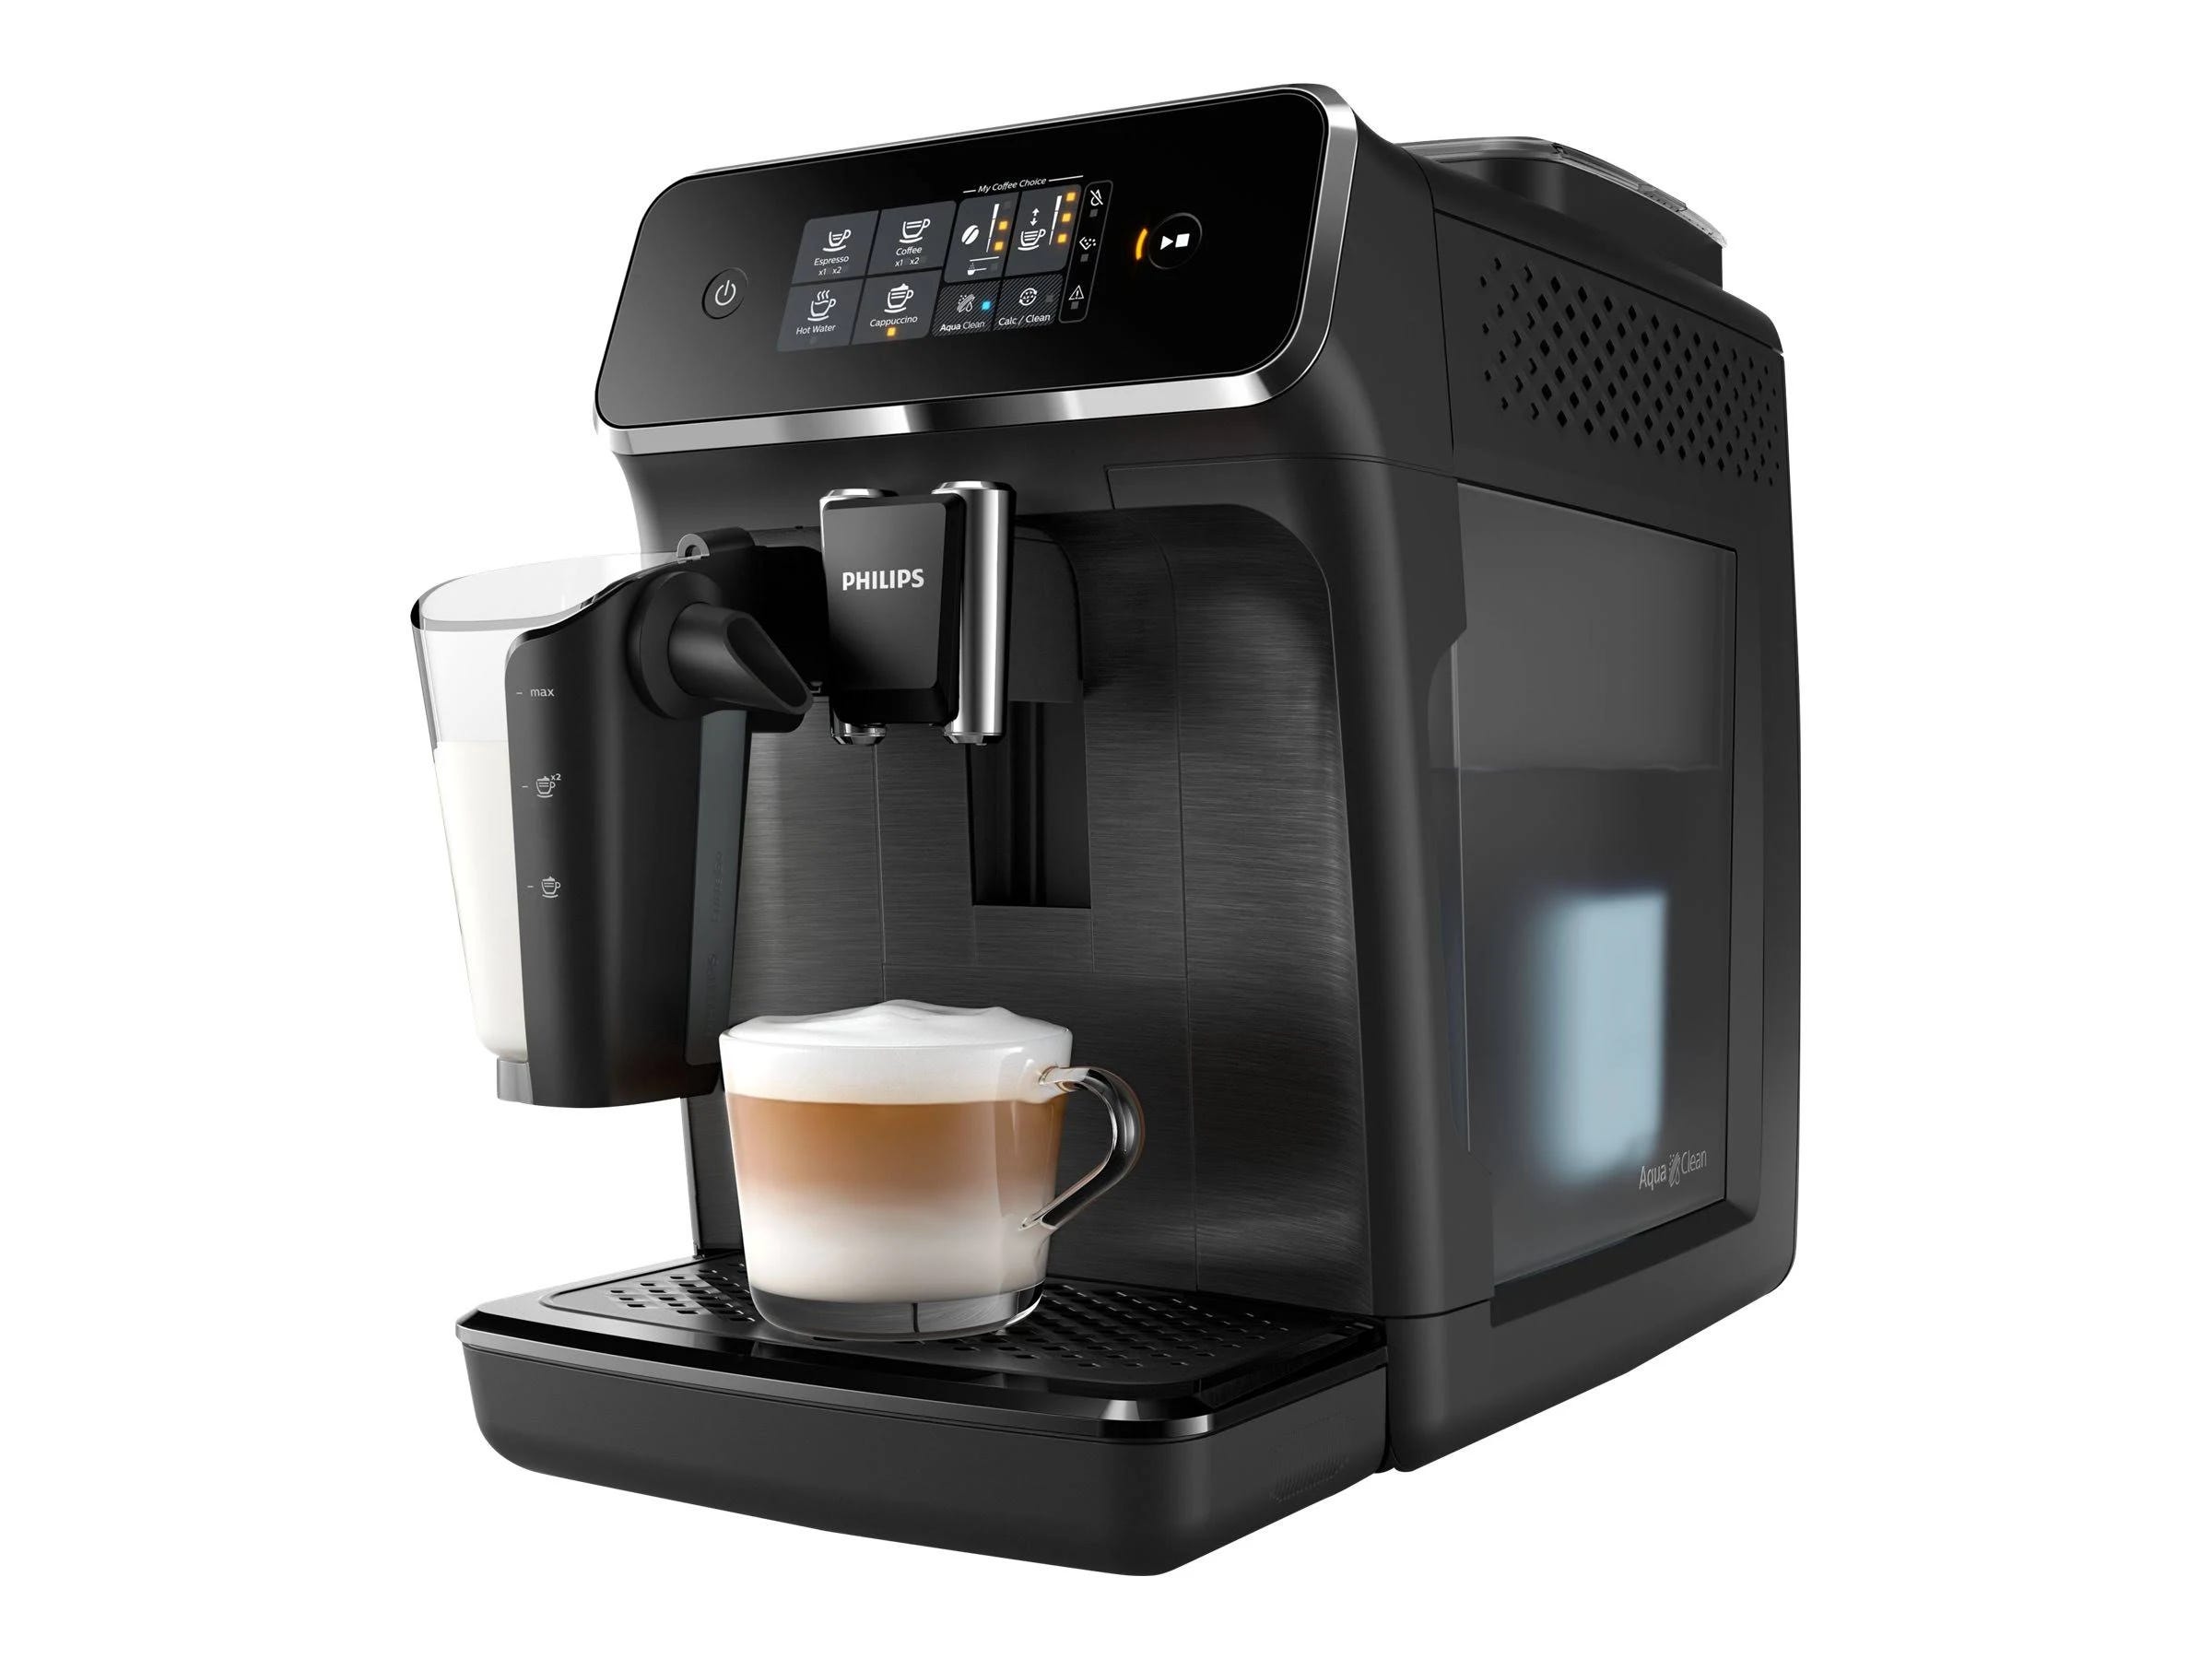 Best Coffee Maker: Philips 2200 Series Fully-auto Espresso Machine with Touchscreen | Image